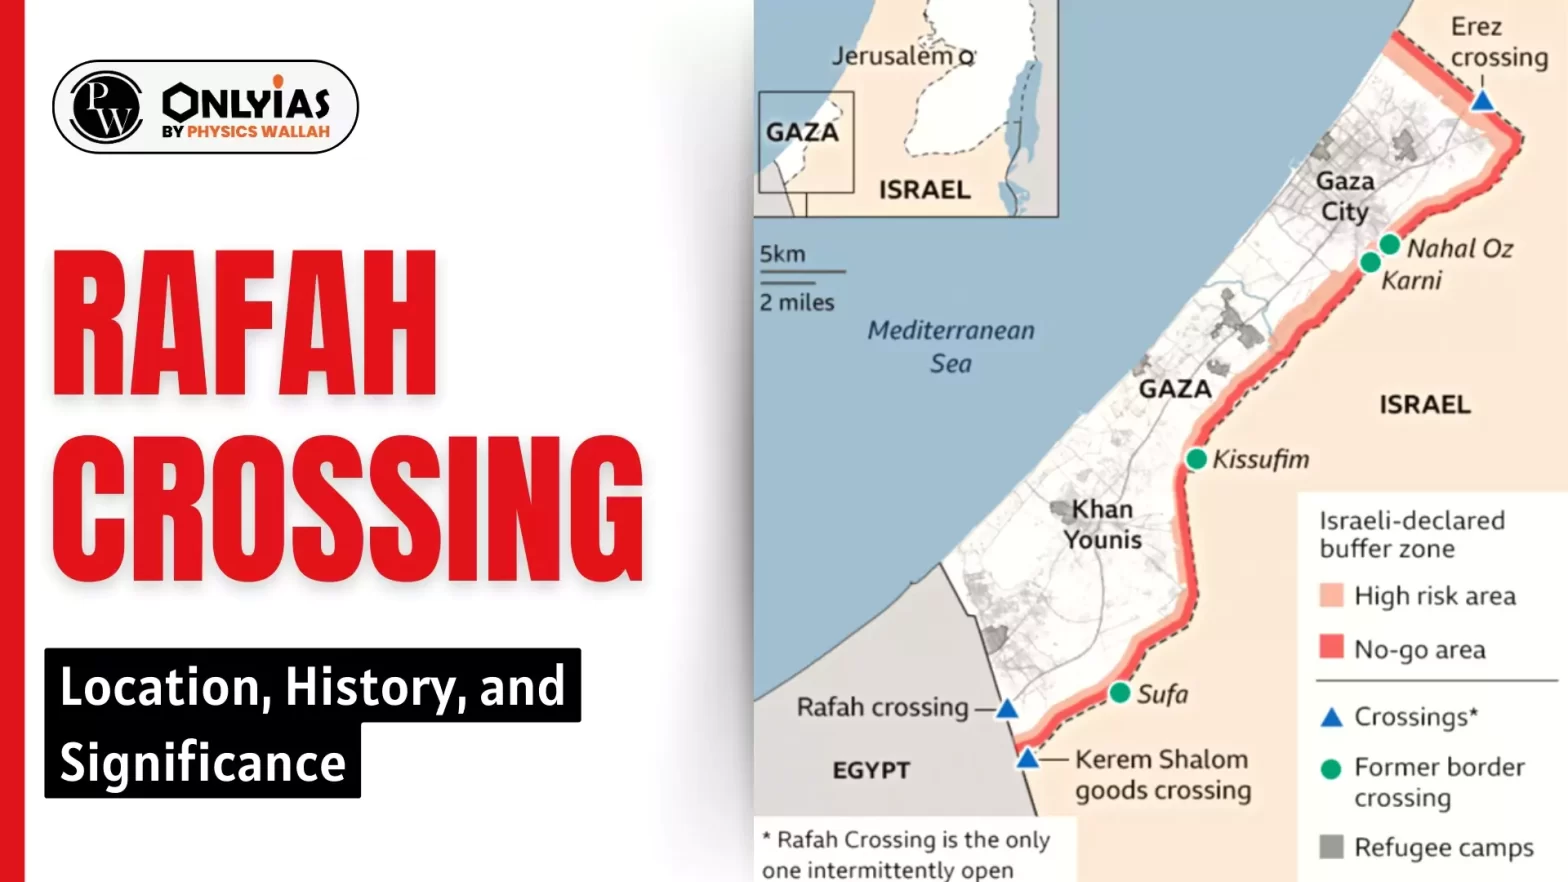 Rafah Crossing: Location, History, and Significance